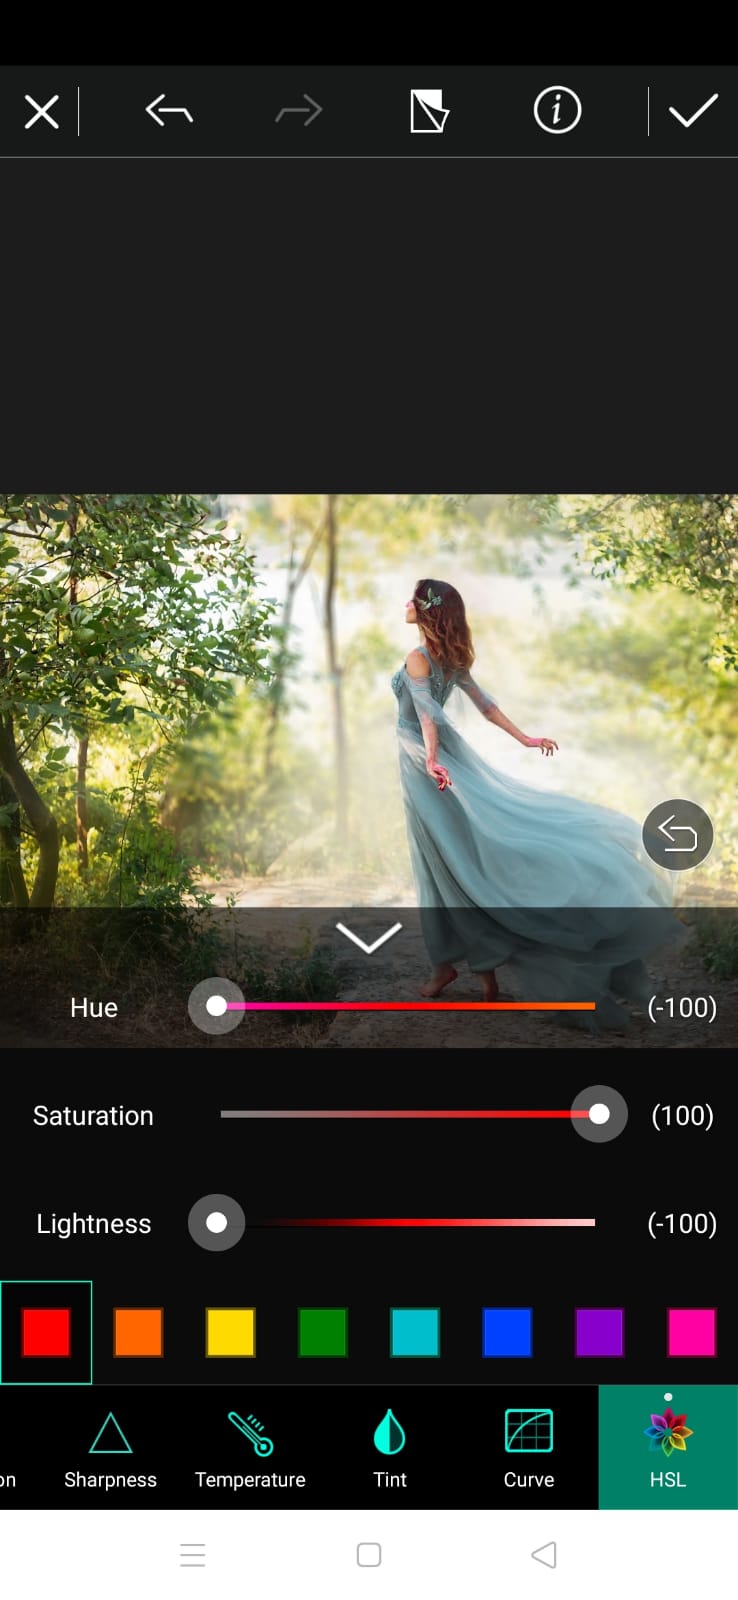 Photodirector Photo Editor Edit Create Stories App Download For Android Apk Apk Downloads